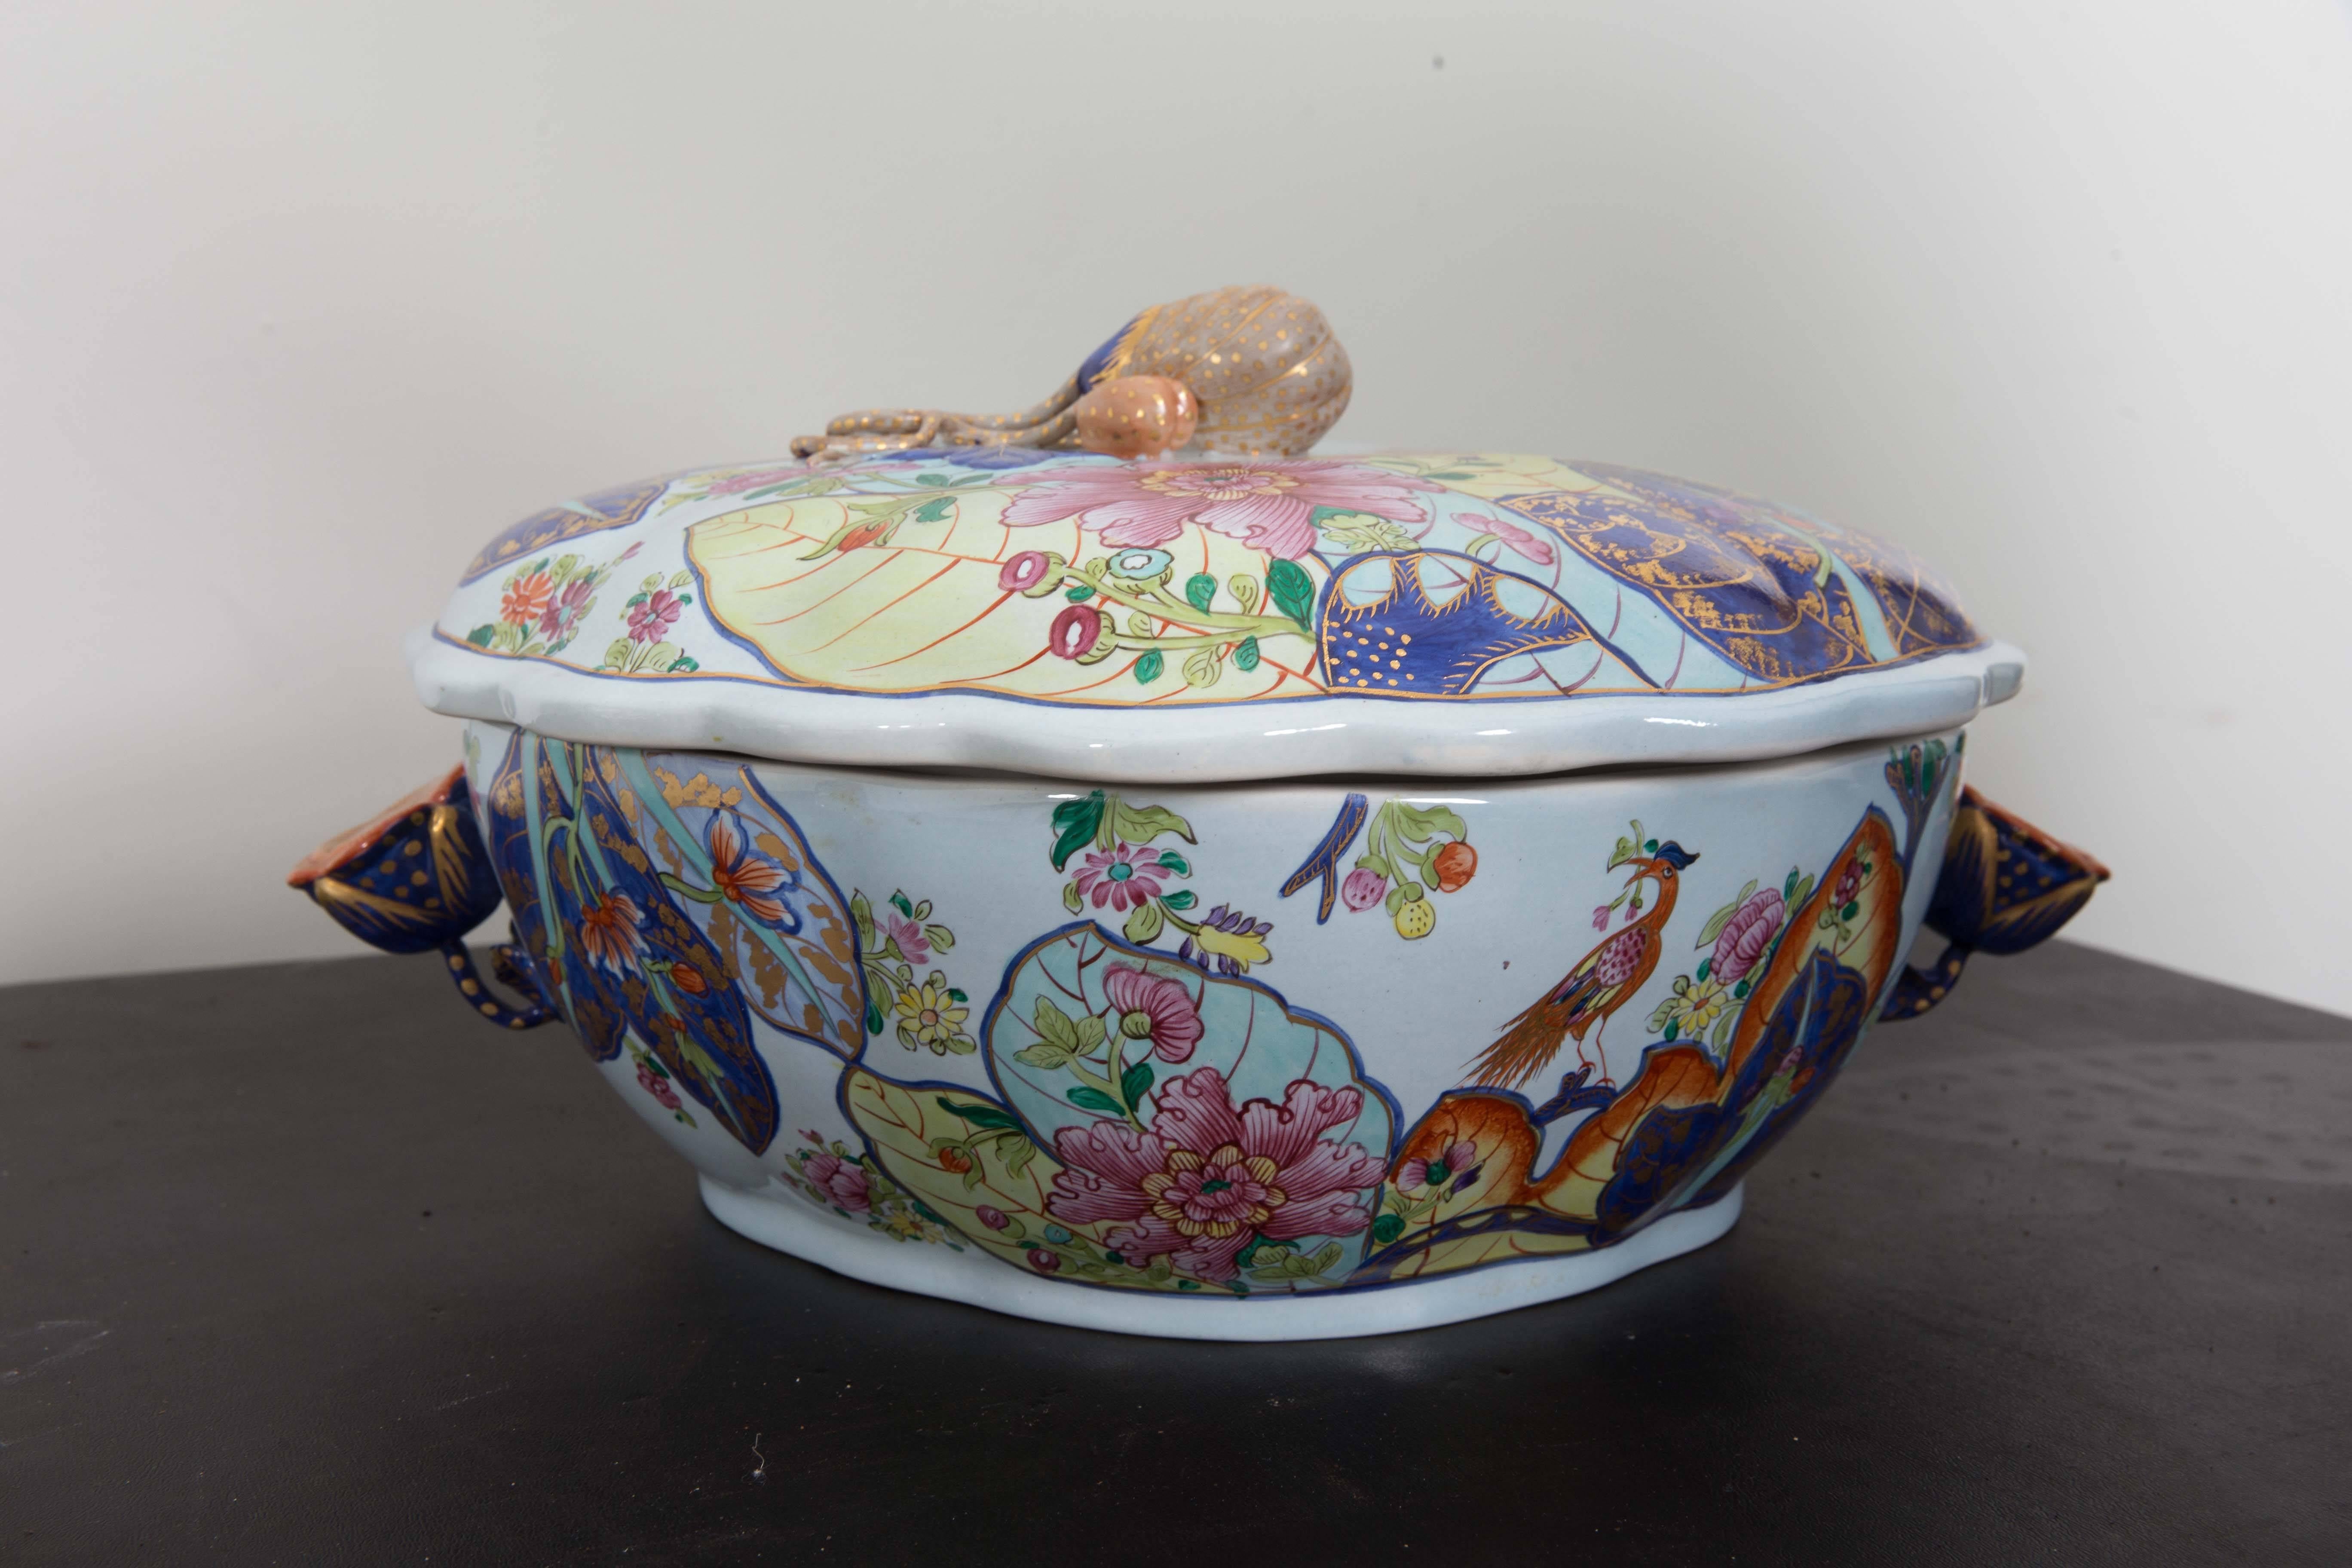 Lowestoft reproduction by Mottahedeh of famous Chinese export pattern of tobacco leaf. Pomegranate handle on tureen lid. Stylized lotus flower handles on sides of tureen. Vibrant colors, blue, yellow, green and pink with gold accents.
Platter